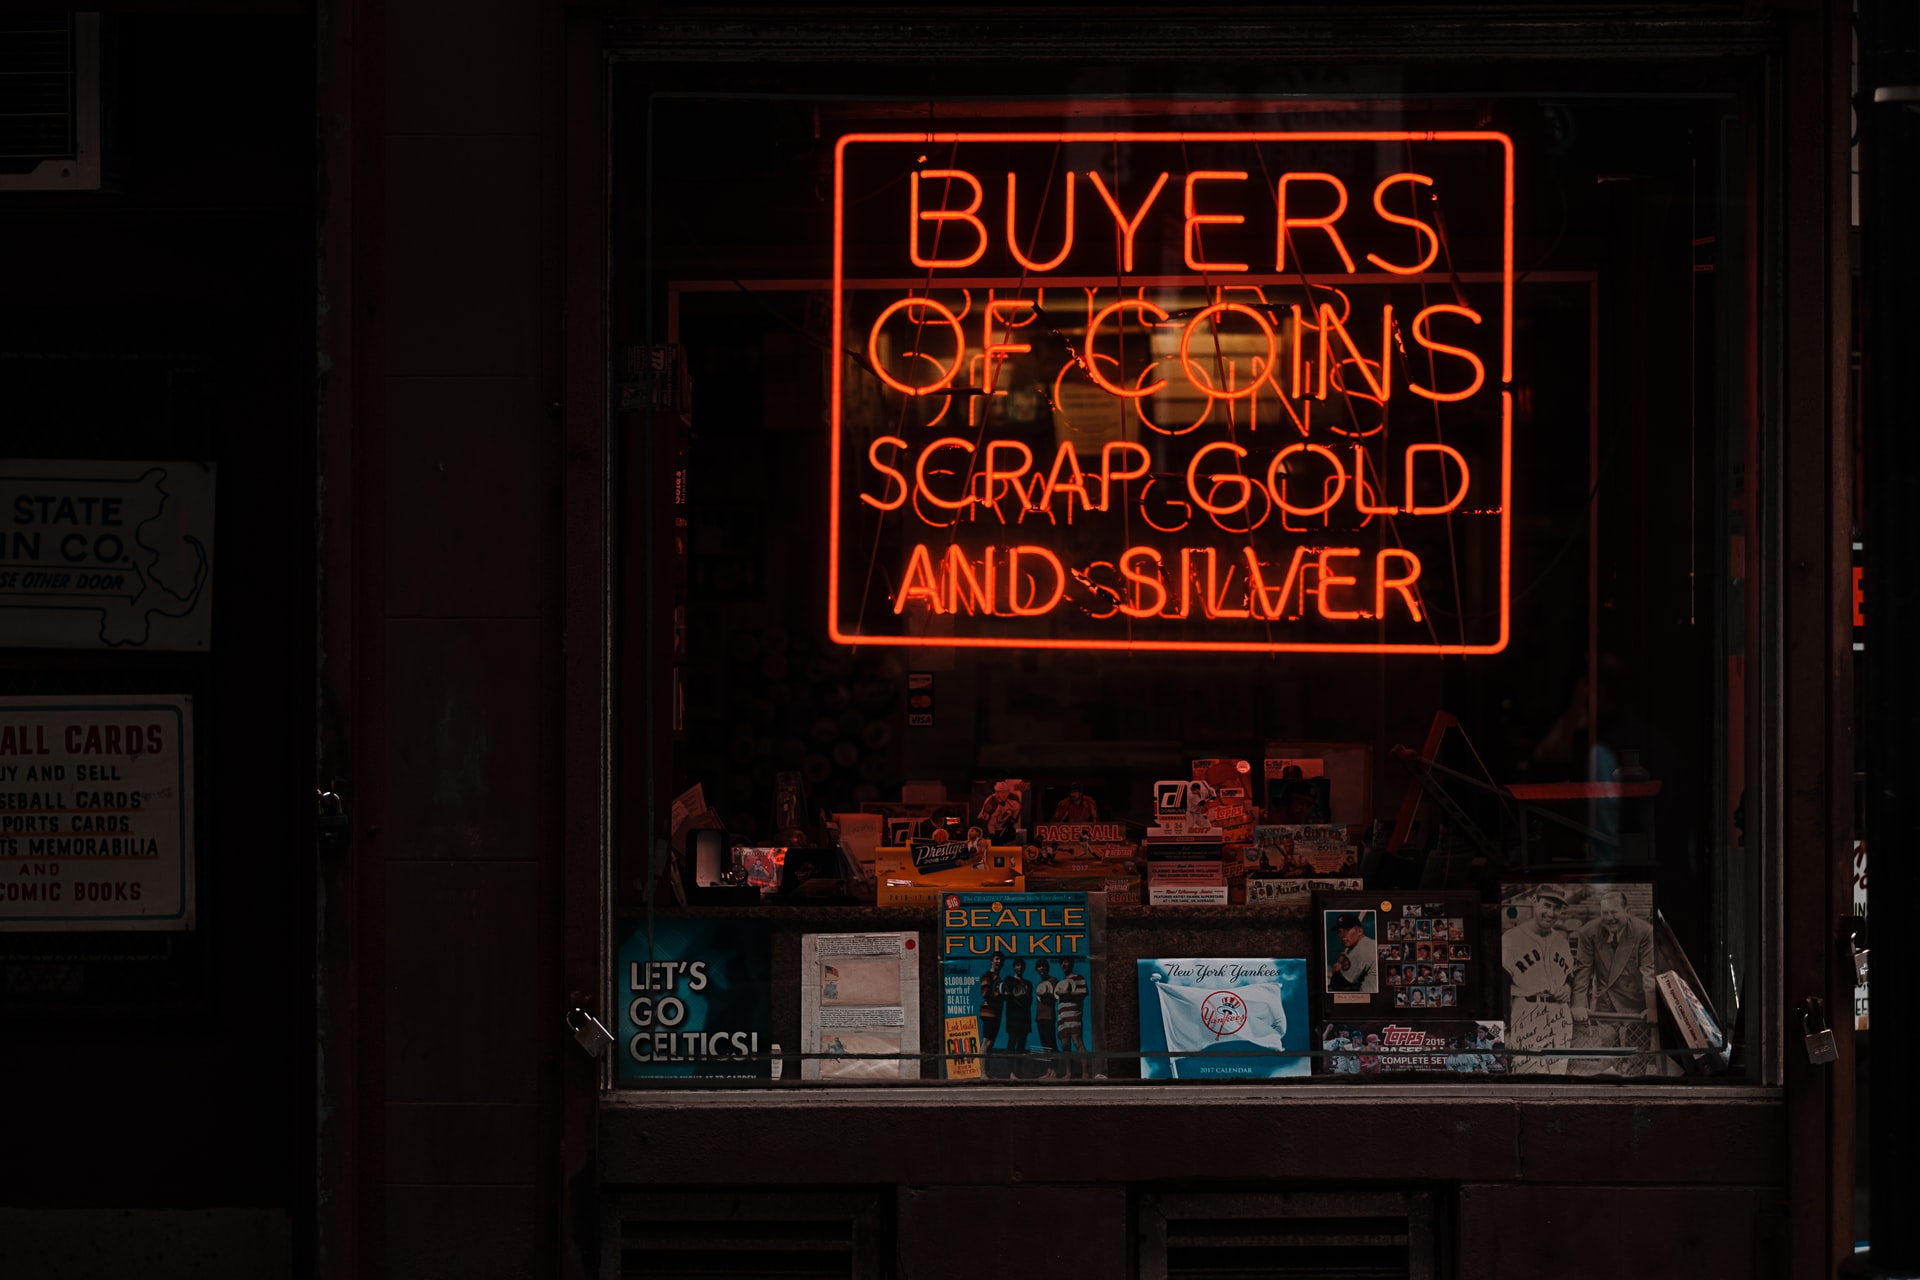 Neon Sign On The Window Of A Pawn Shop In Pittsburgh, PA Advertising That They Buy Coins, Gold, And Silver.